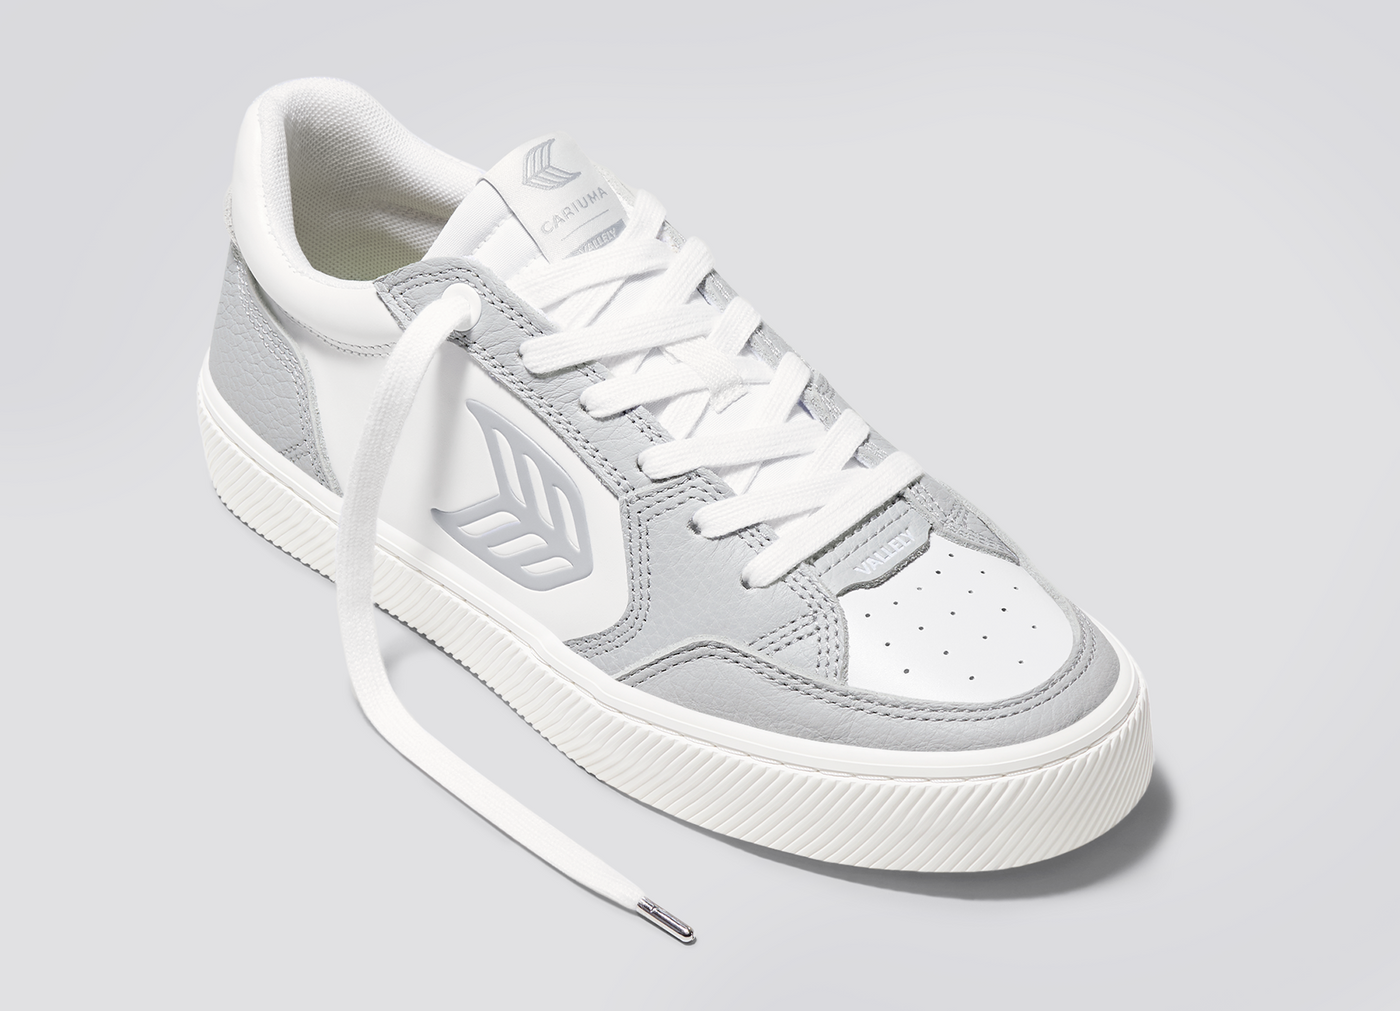 VALLELY White Leather Onyx Grey Accents Sneaker Women